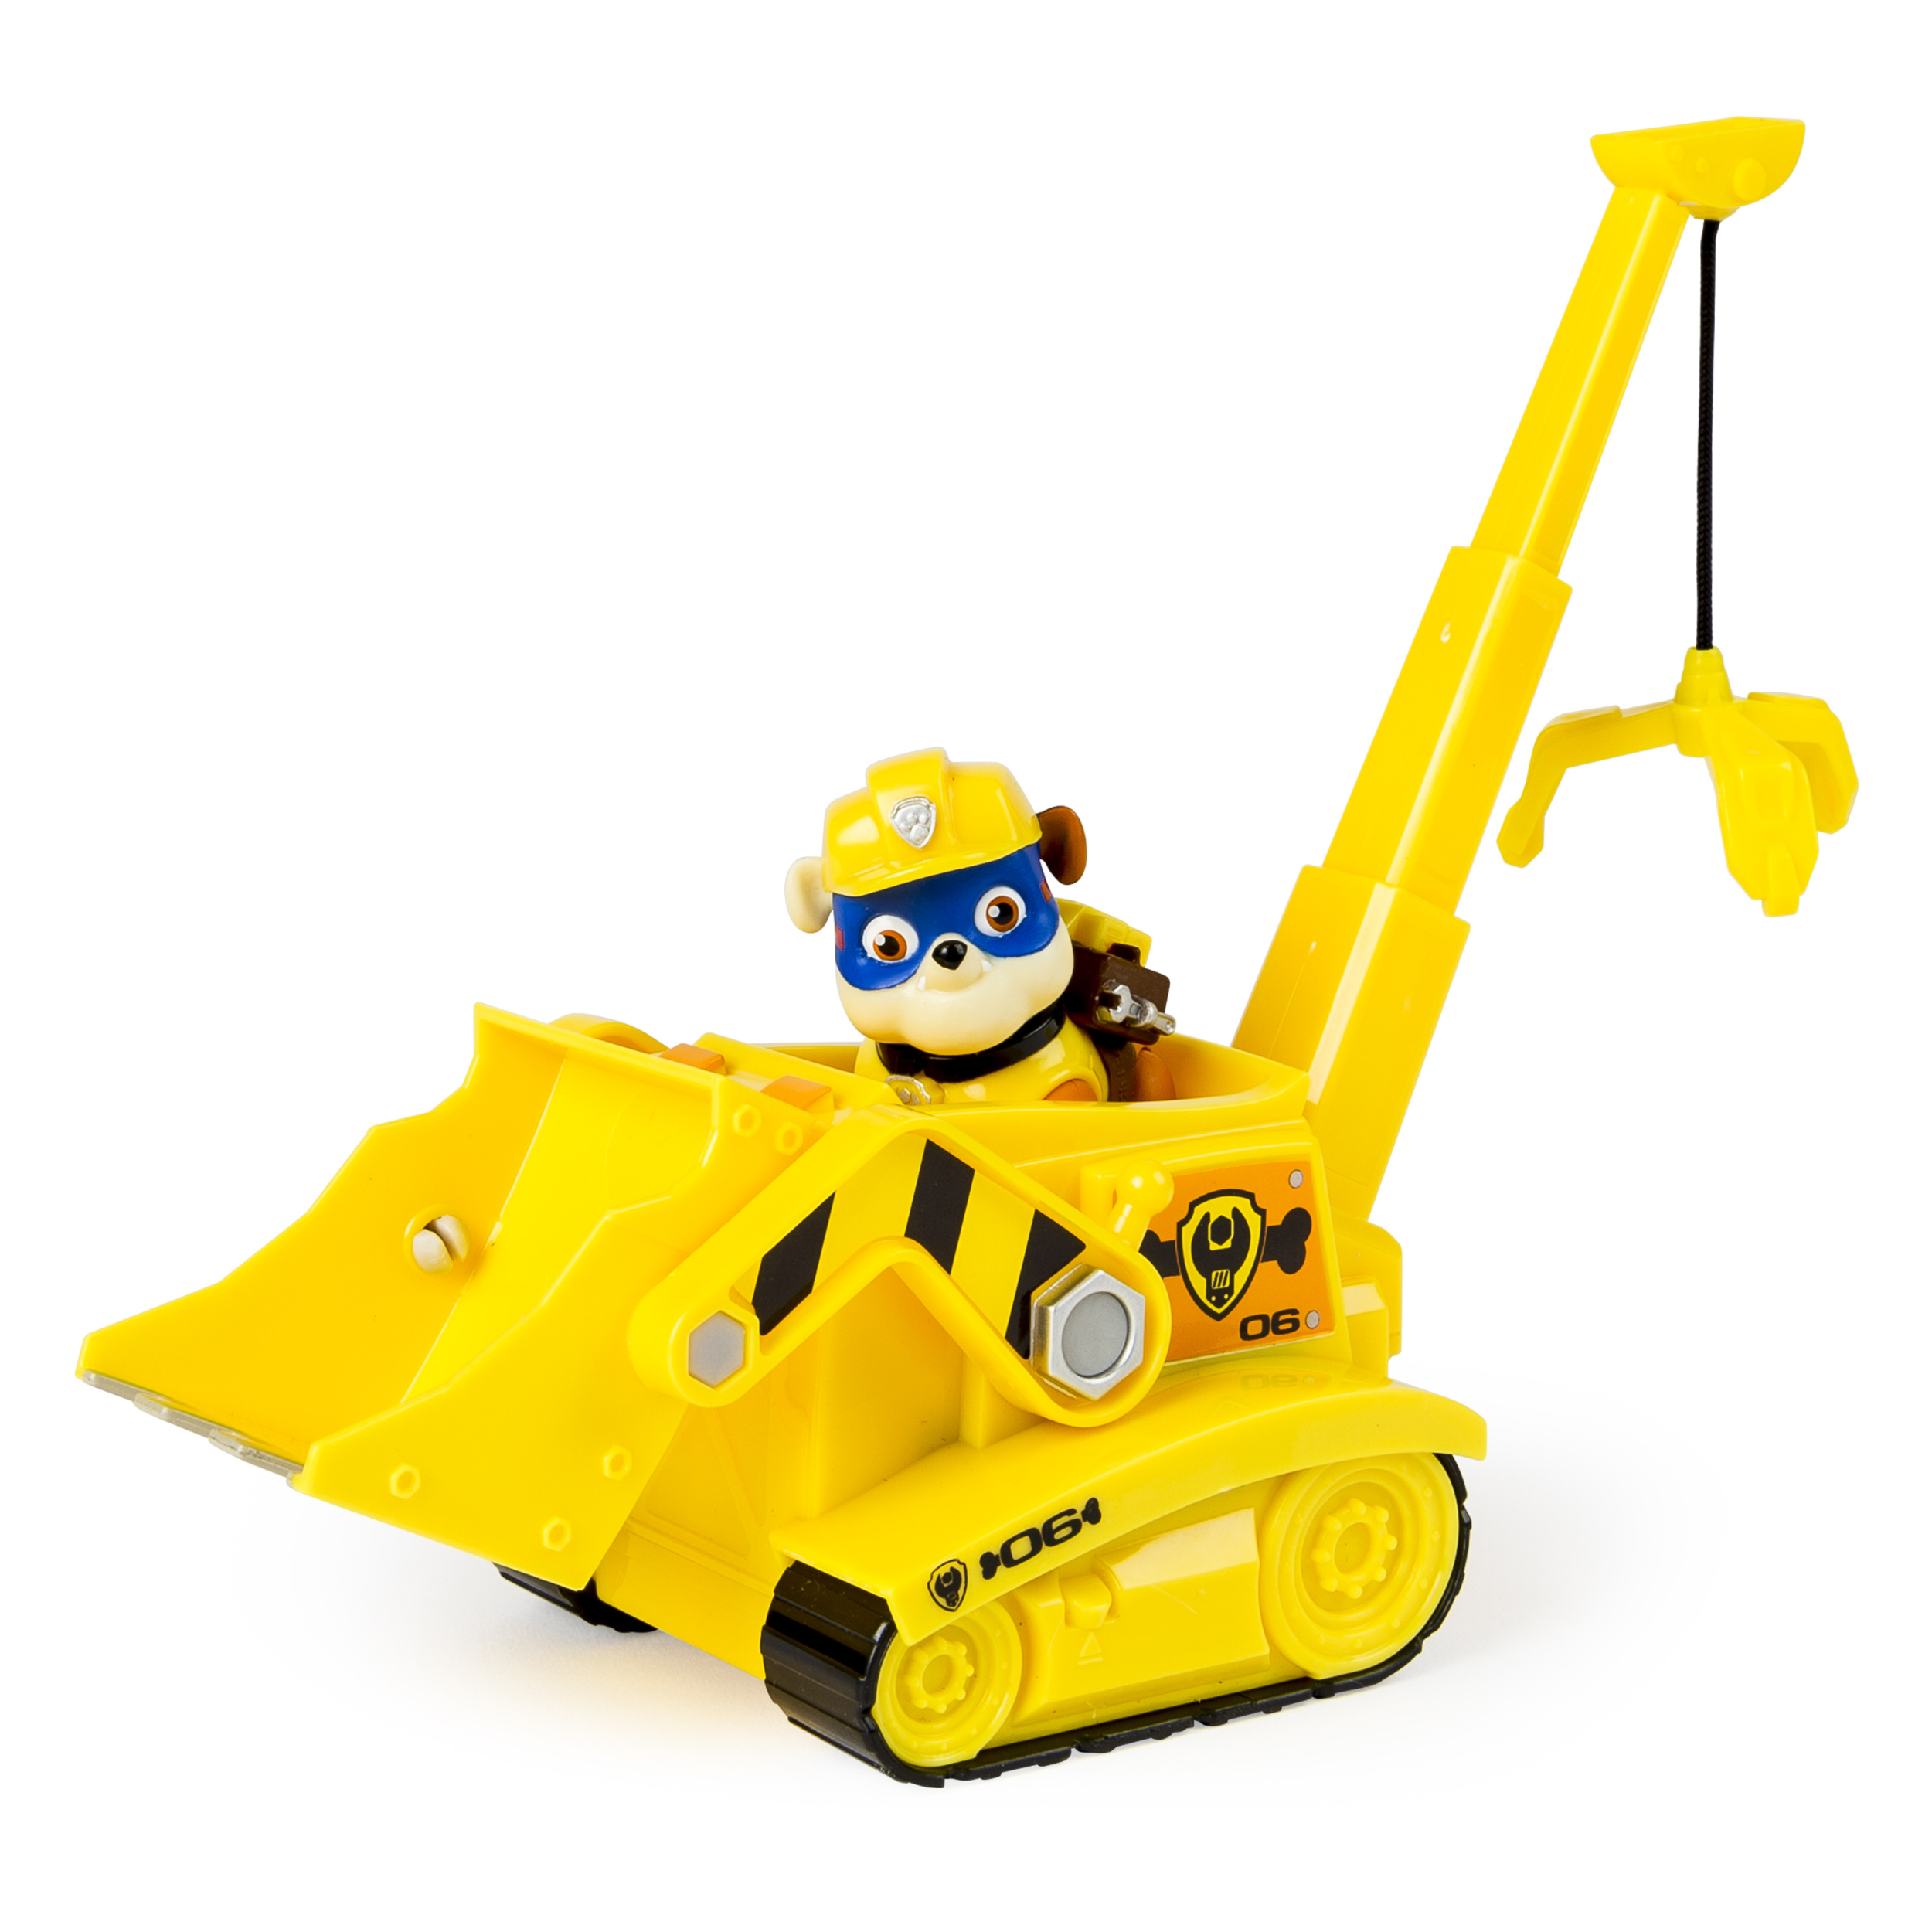 Paw Patrol Super Pup Rubble's Crane, Vehicle and Figure - image 2 of 6